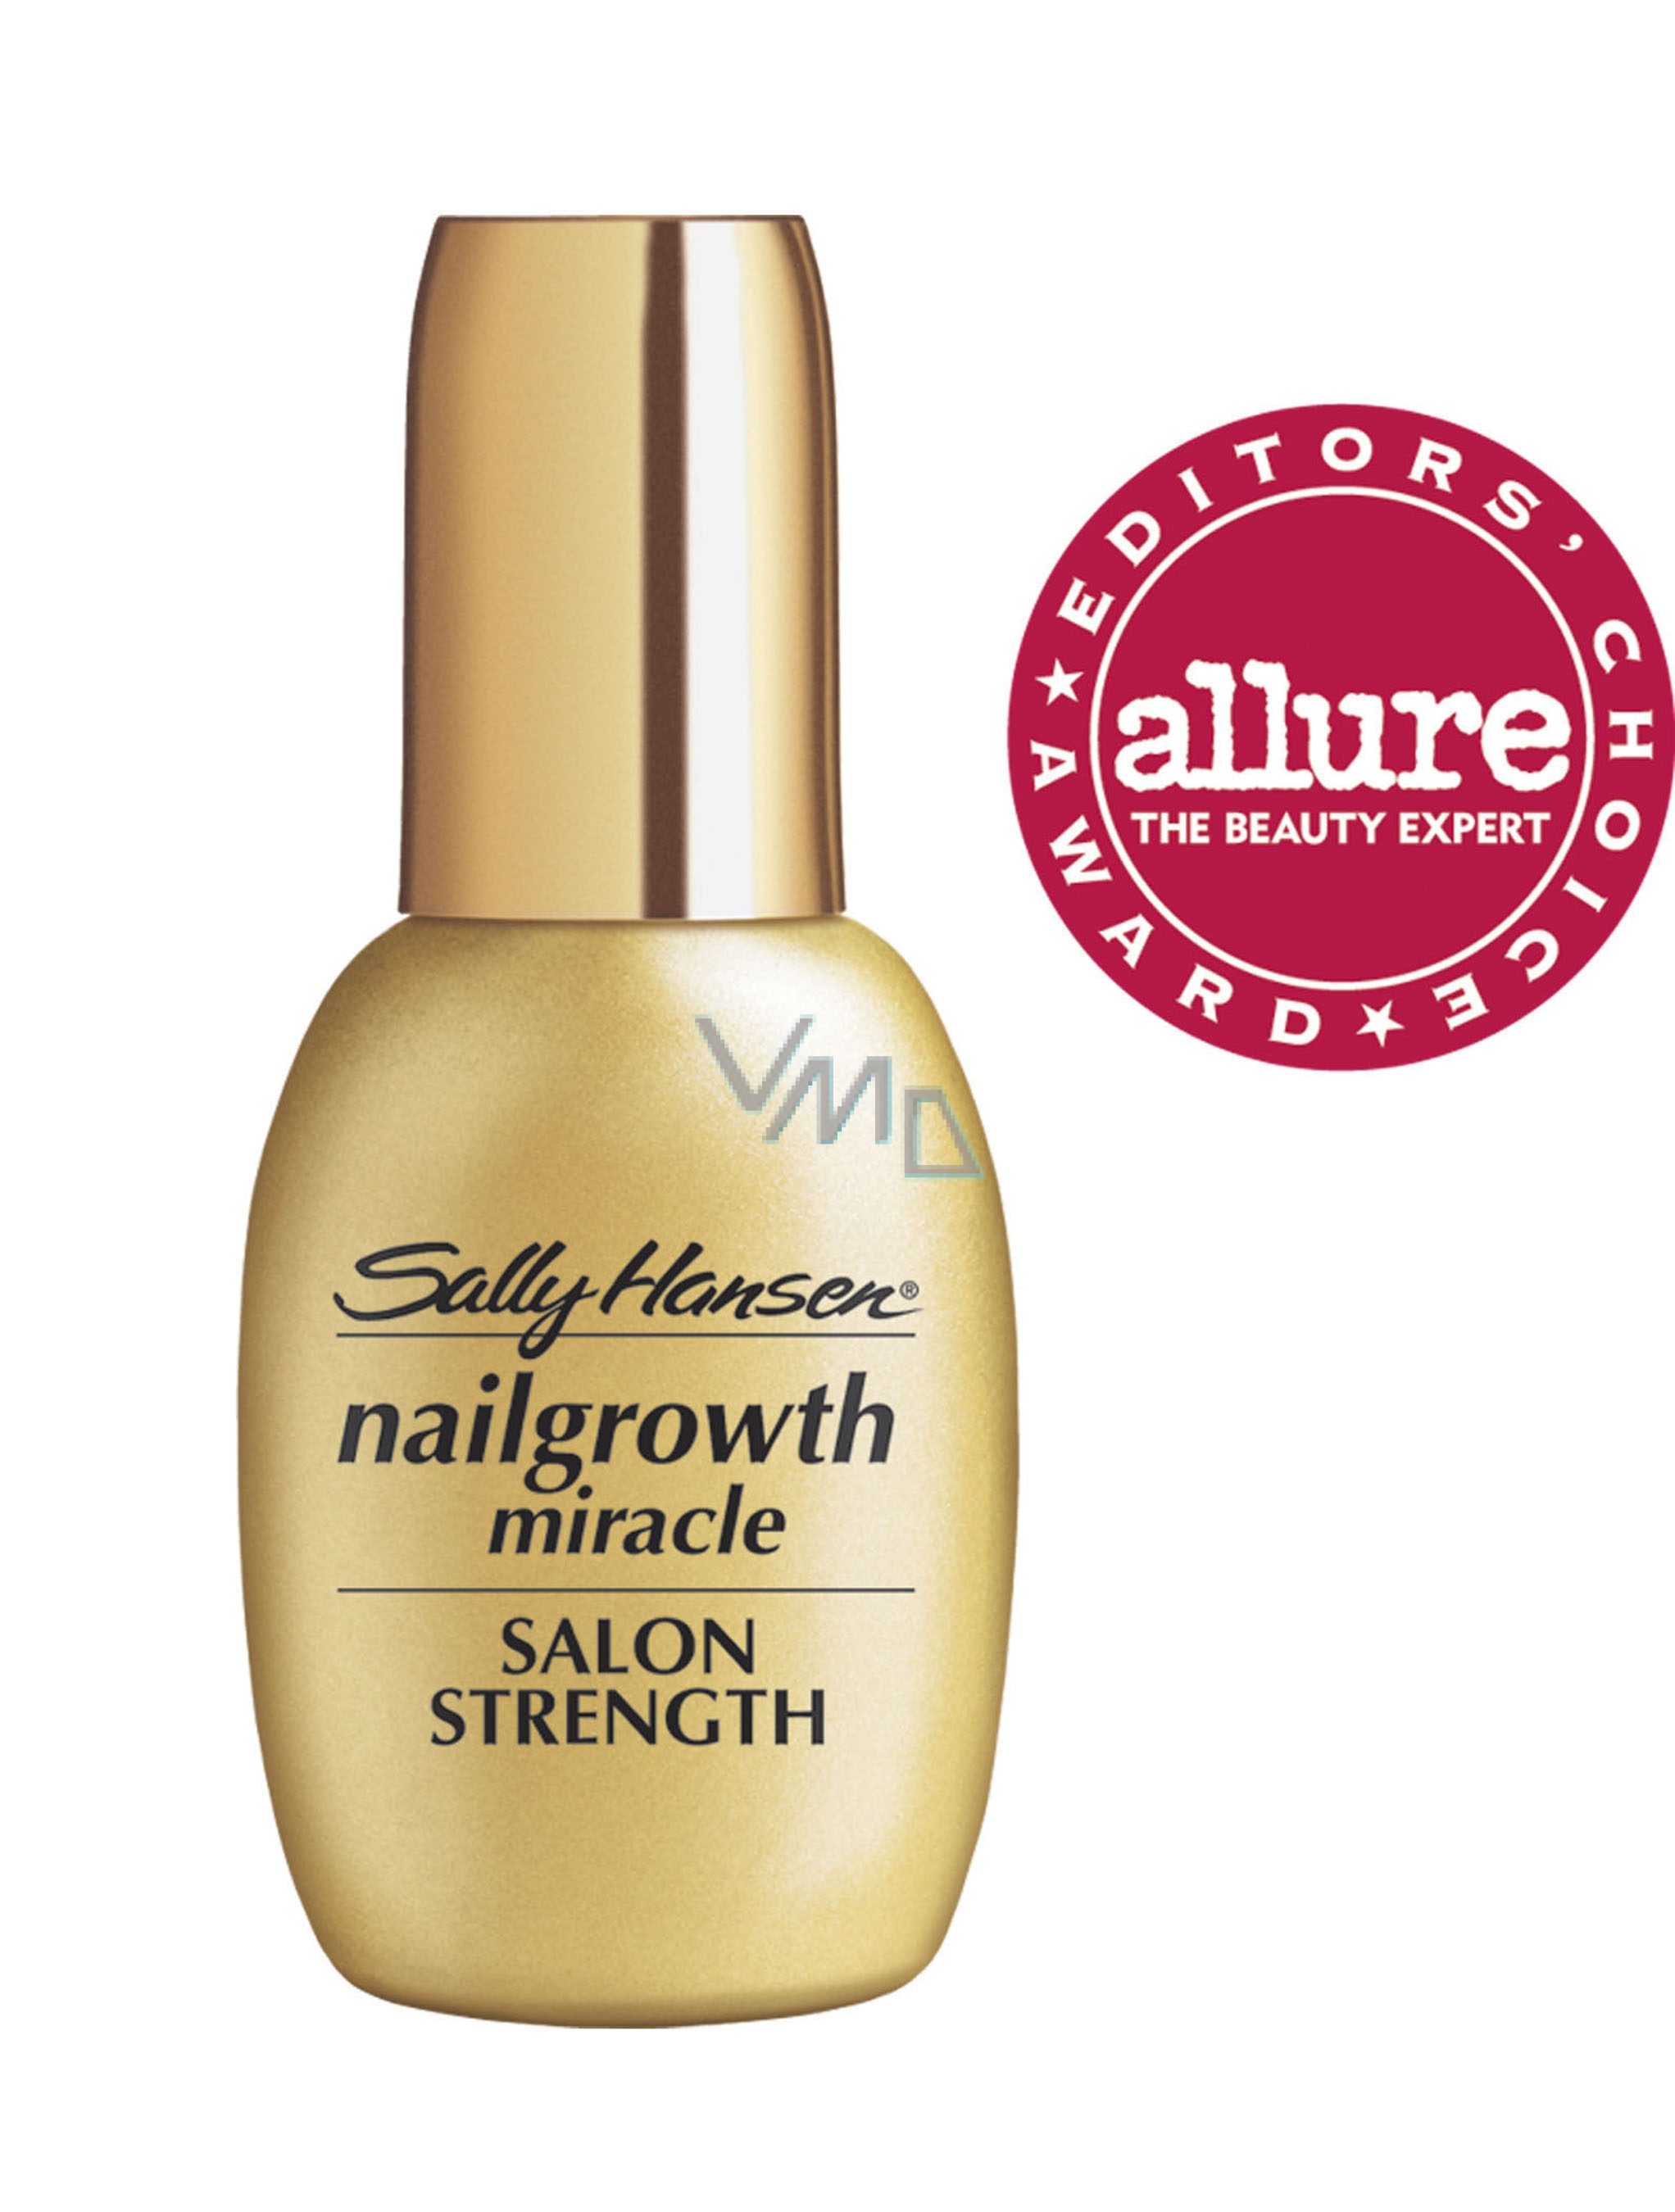 Sally Hansen Nailgrowth Miracle Professional Nail Treatment To Grow Without Breaking 13 3 Ml Vmd Parfumerie Drogerie